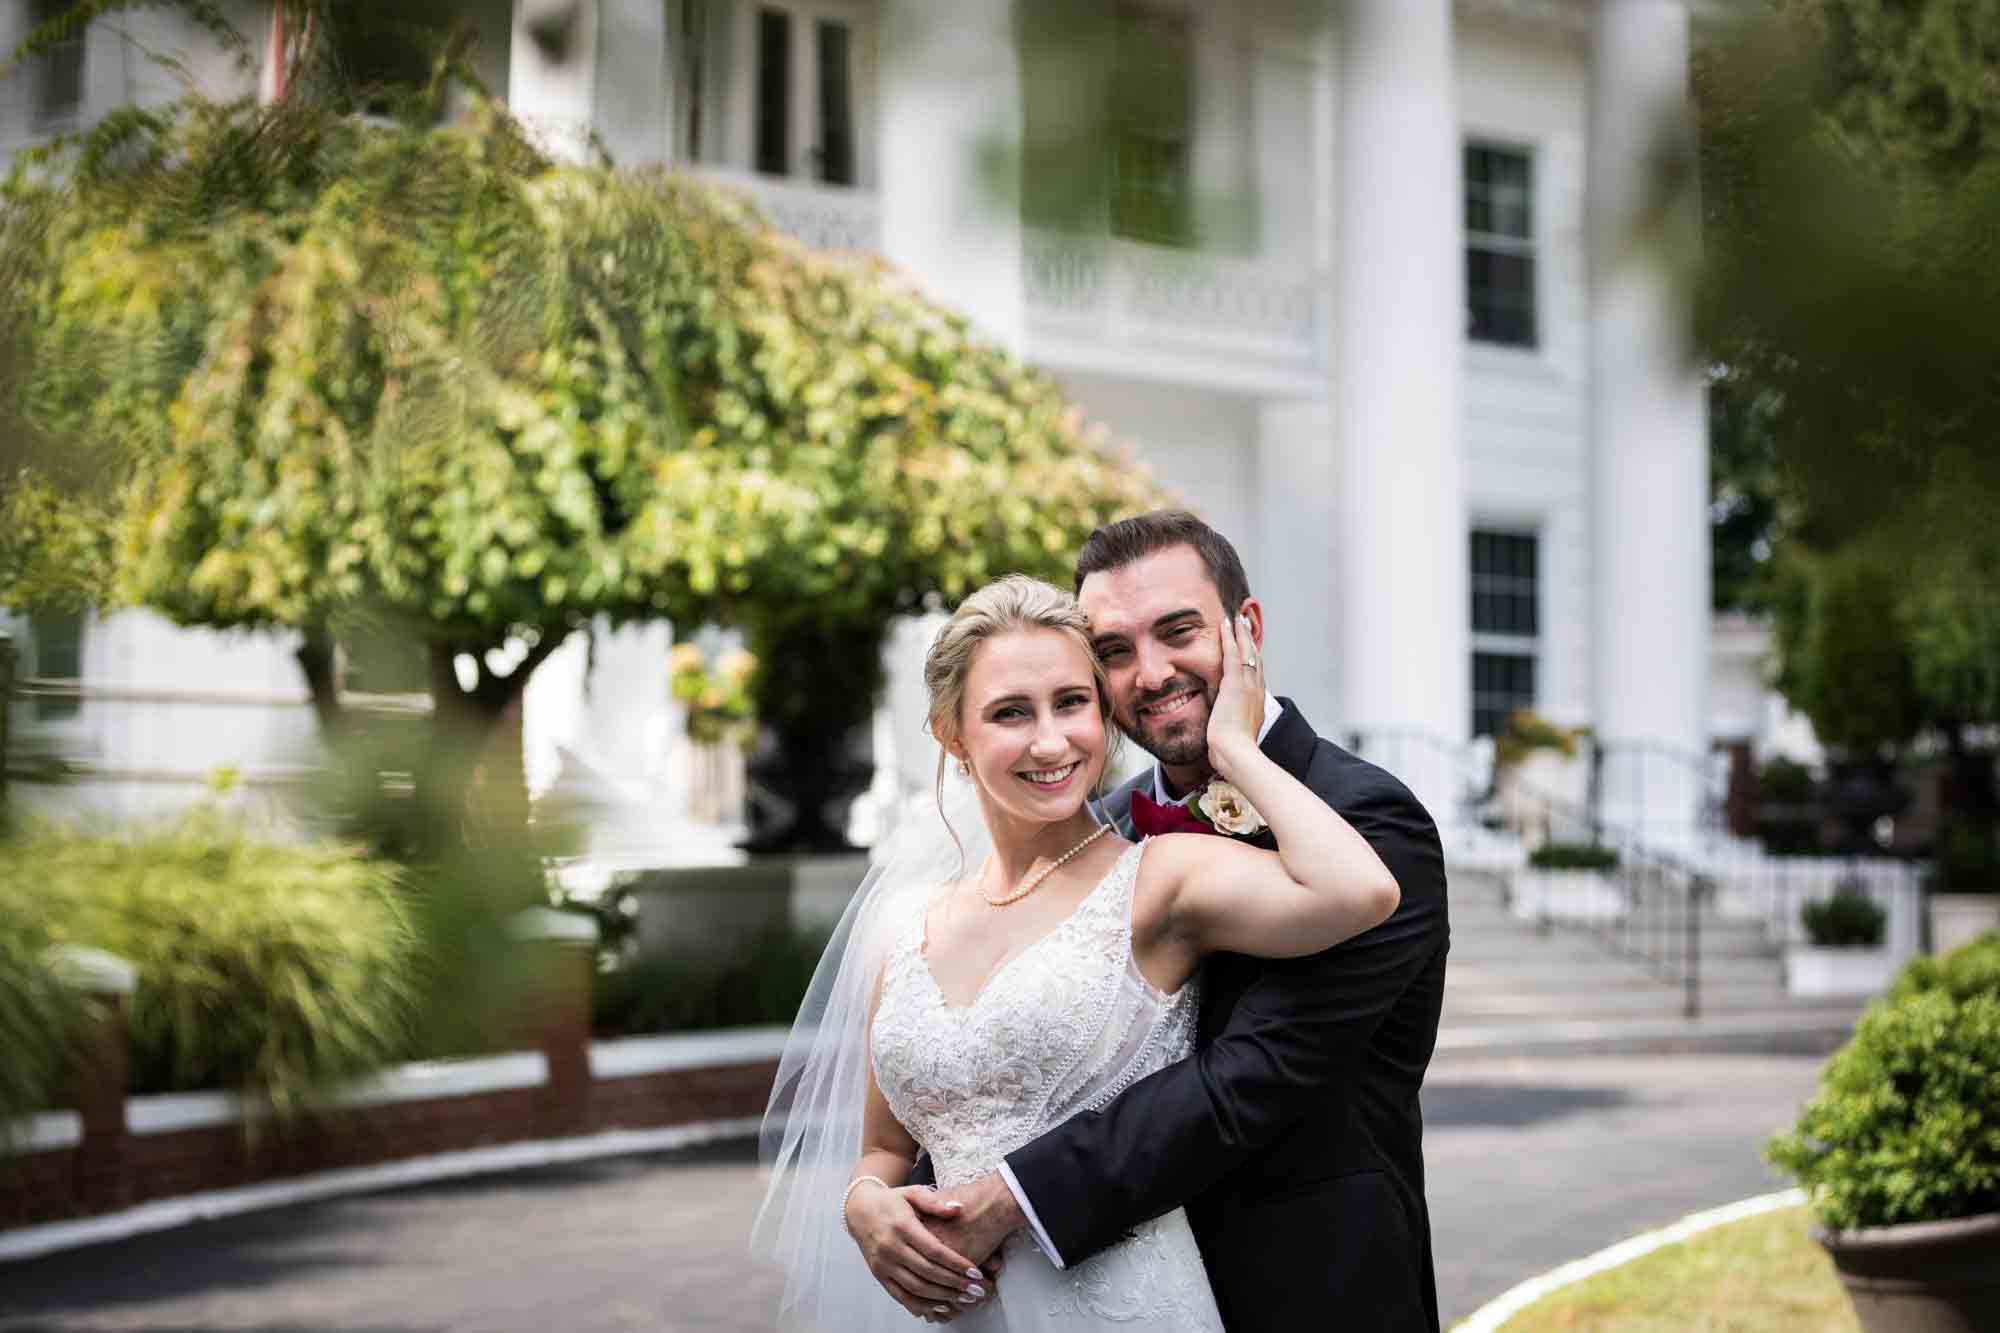 Bride hugging groom with hand on his face in front of white historical home at a Briarcliff Manor wedding